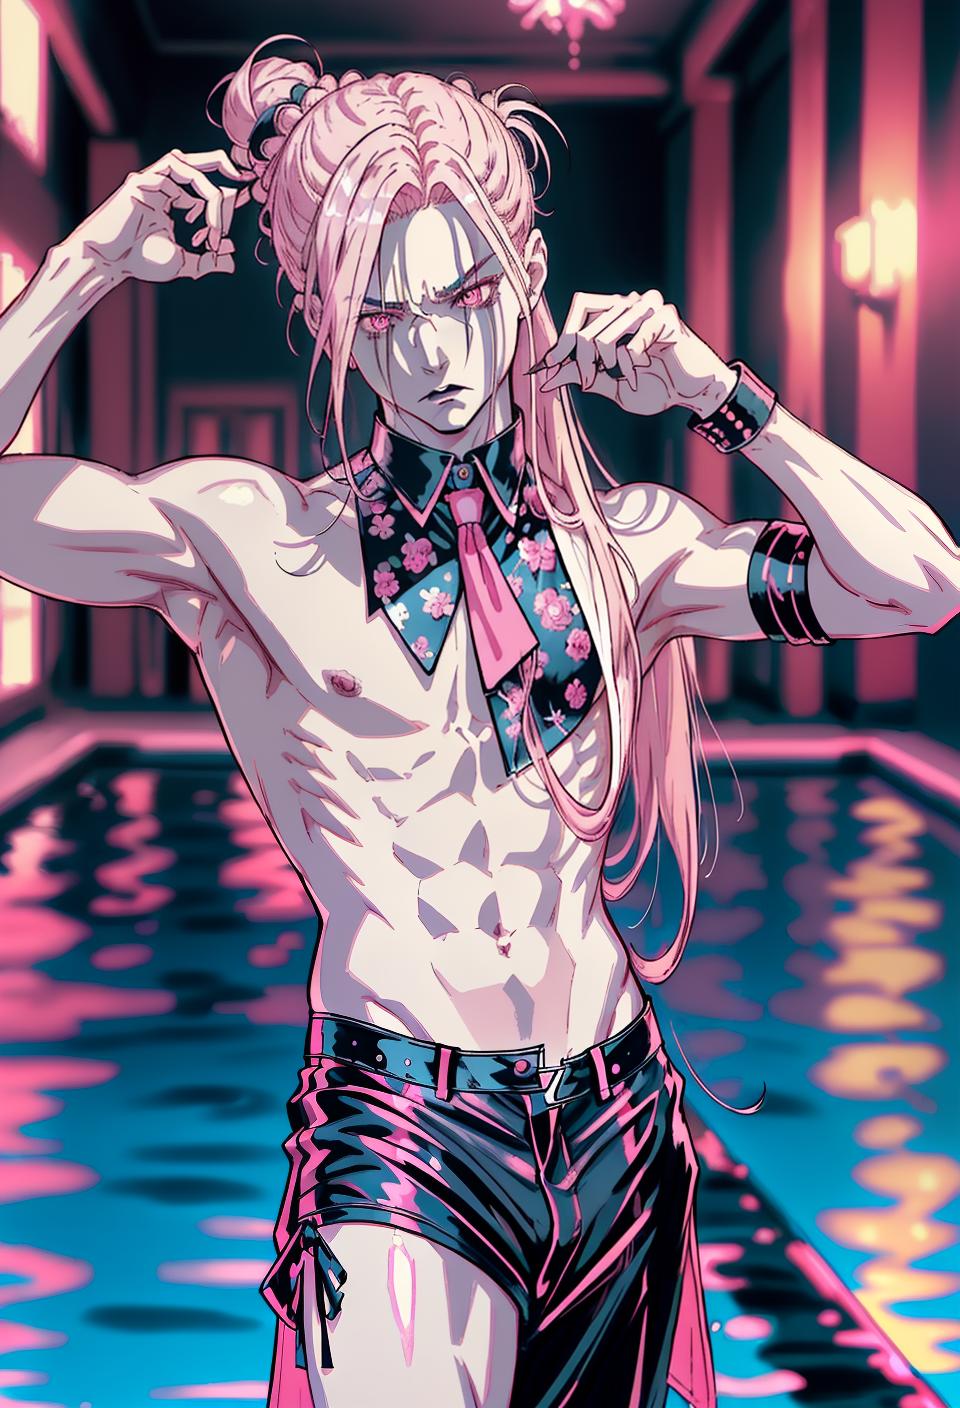  ((trending, highres, masterpiece, cinematic shot)), 1boy, mature, male goth clothing, pool scene, long straight pink hair, hair in a bun, narrow pink eyes, flamboyant pose, dramatic personality, sad expression, very pale skin, chaotic, toned